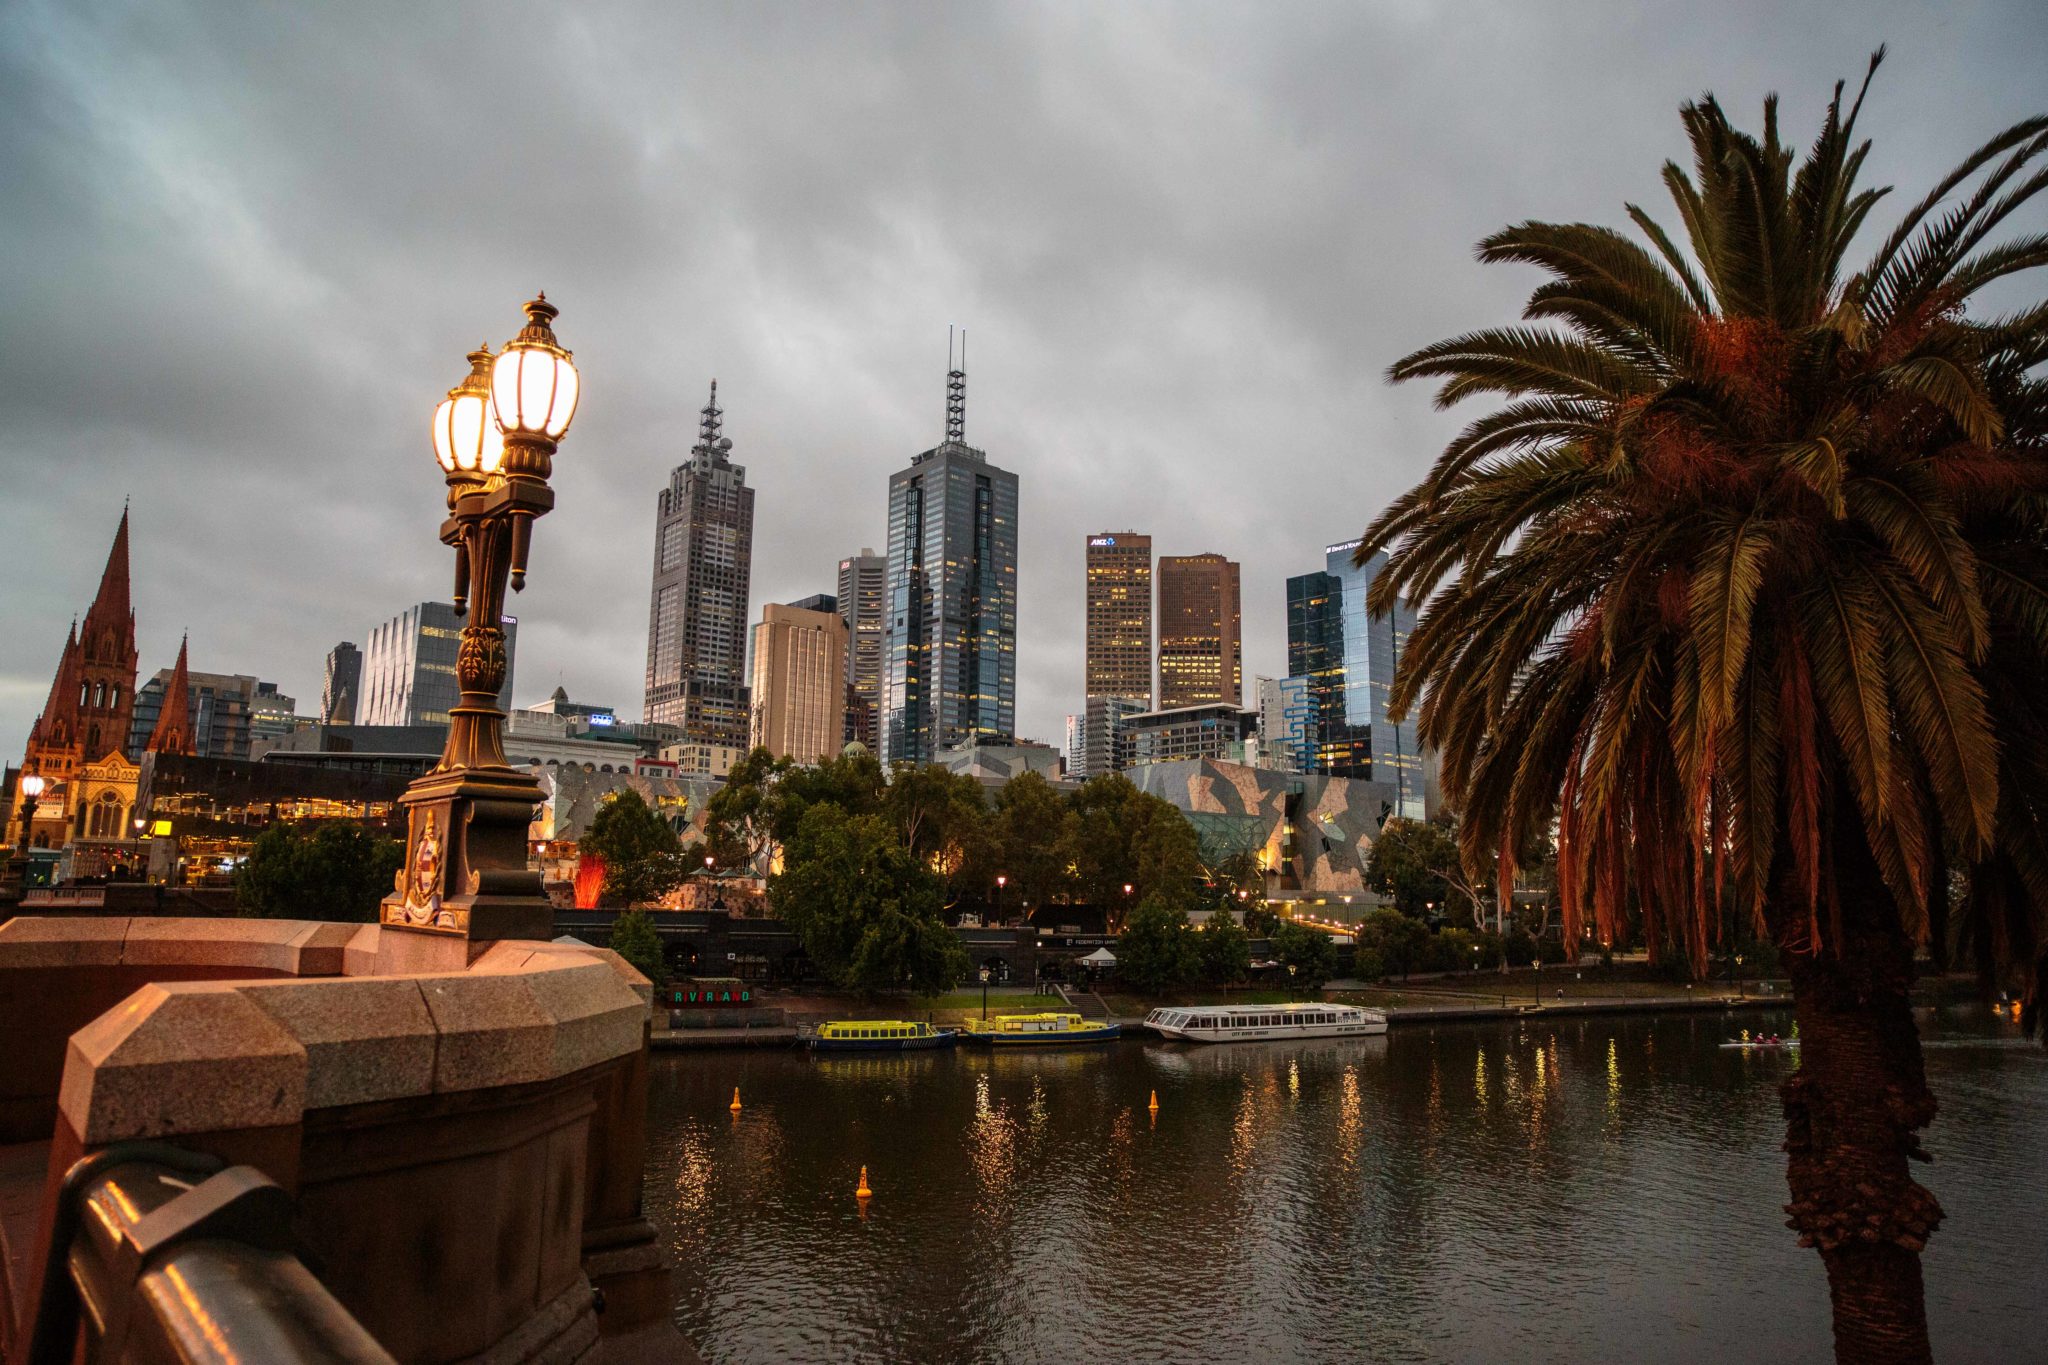 Melbourne's skyline and the Yarra River from Princes Bridge